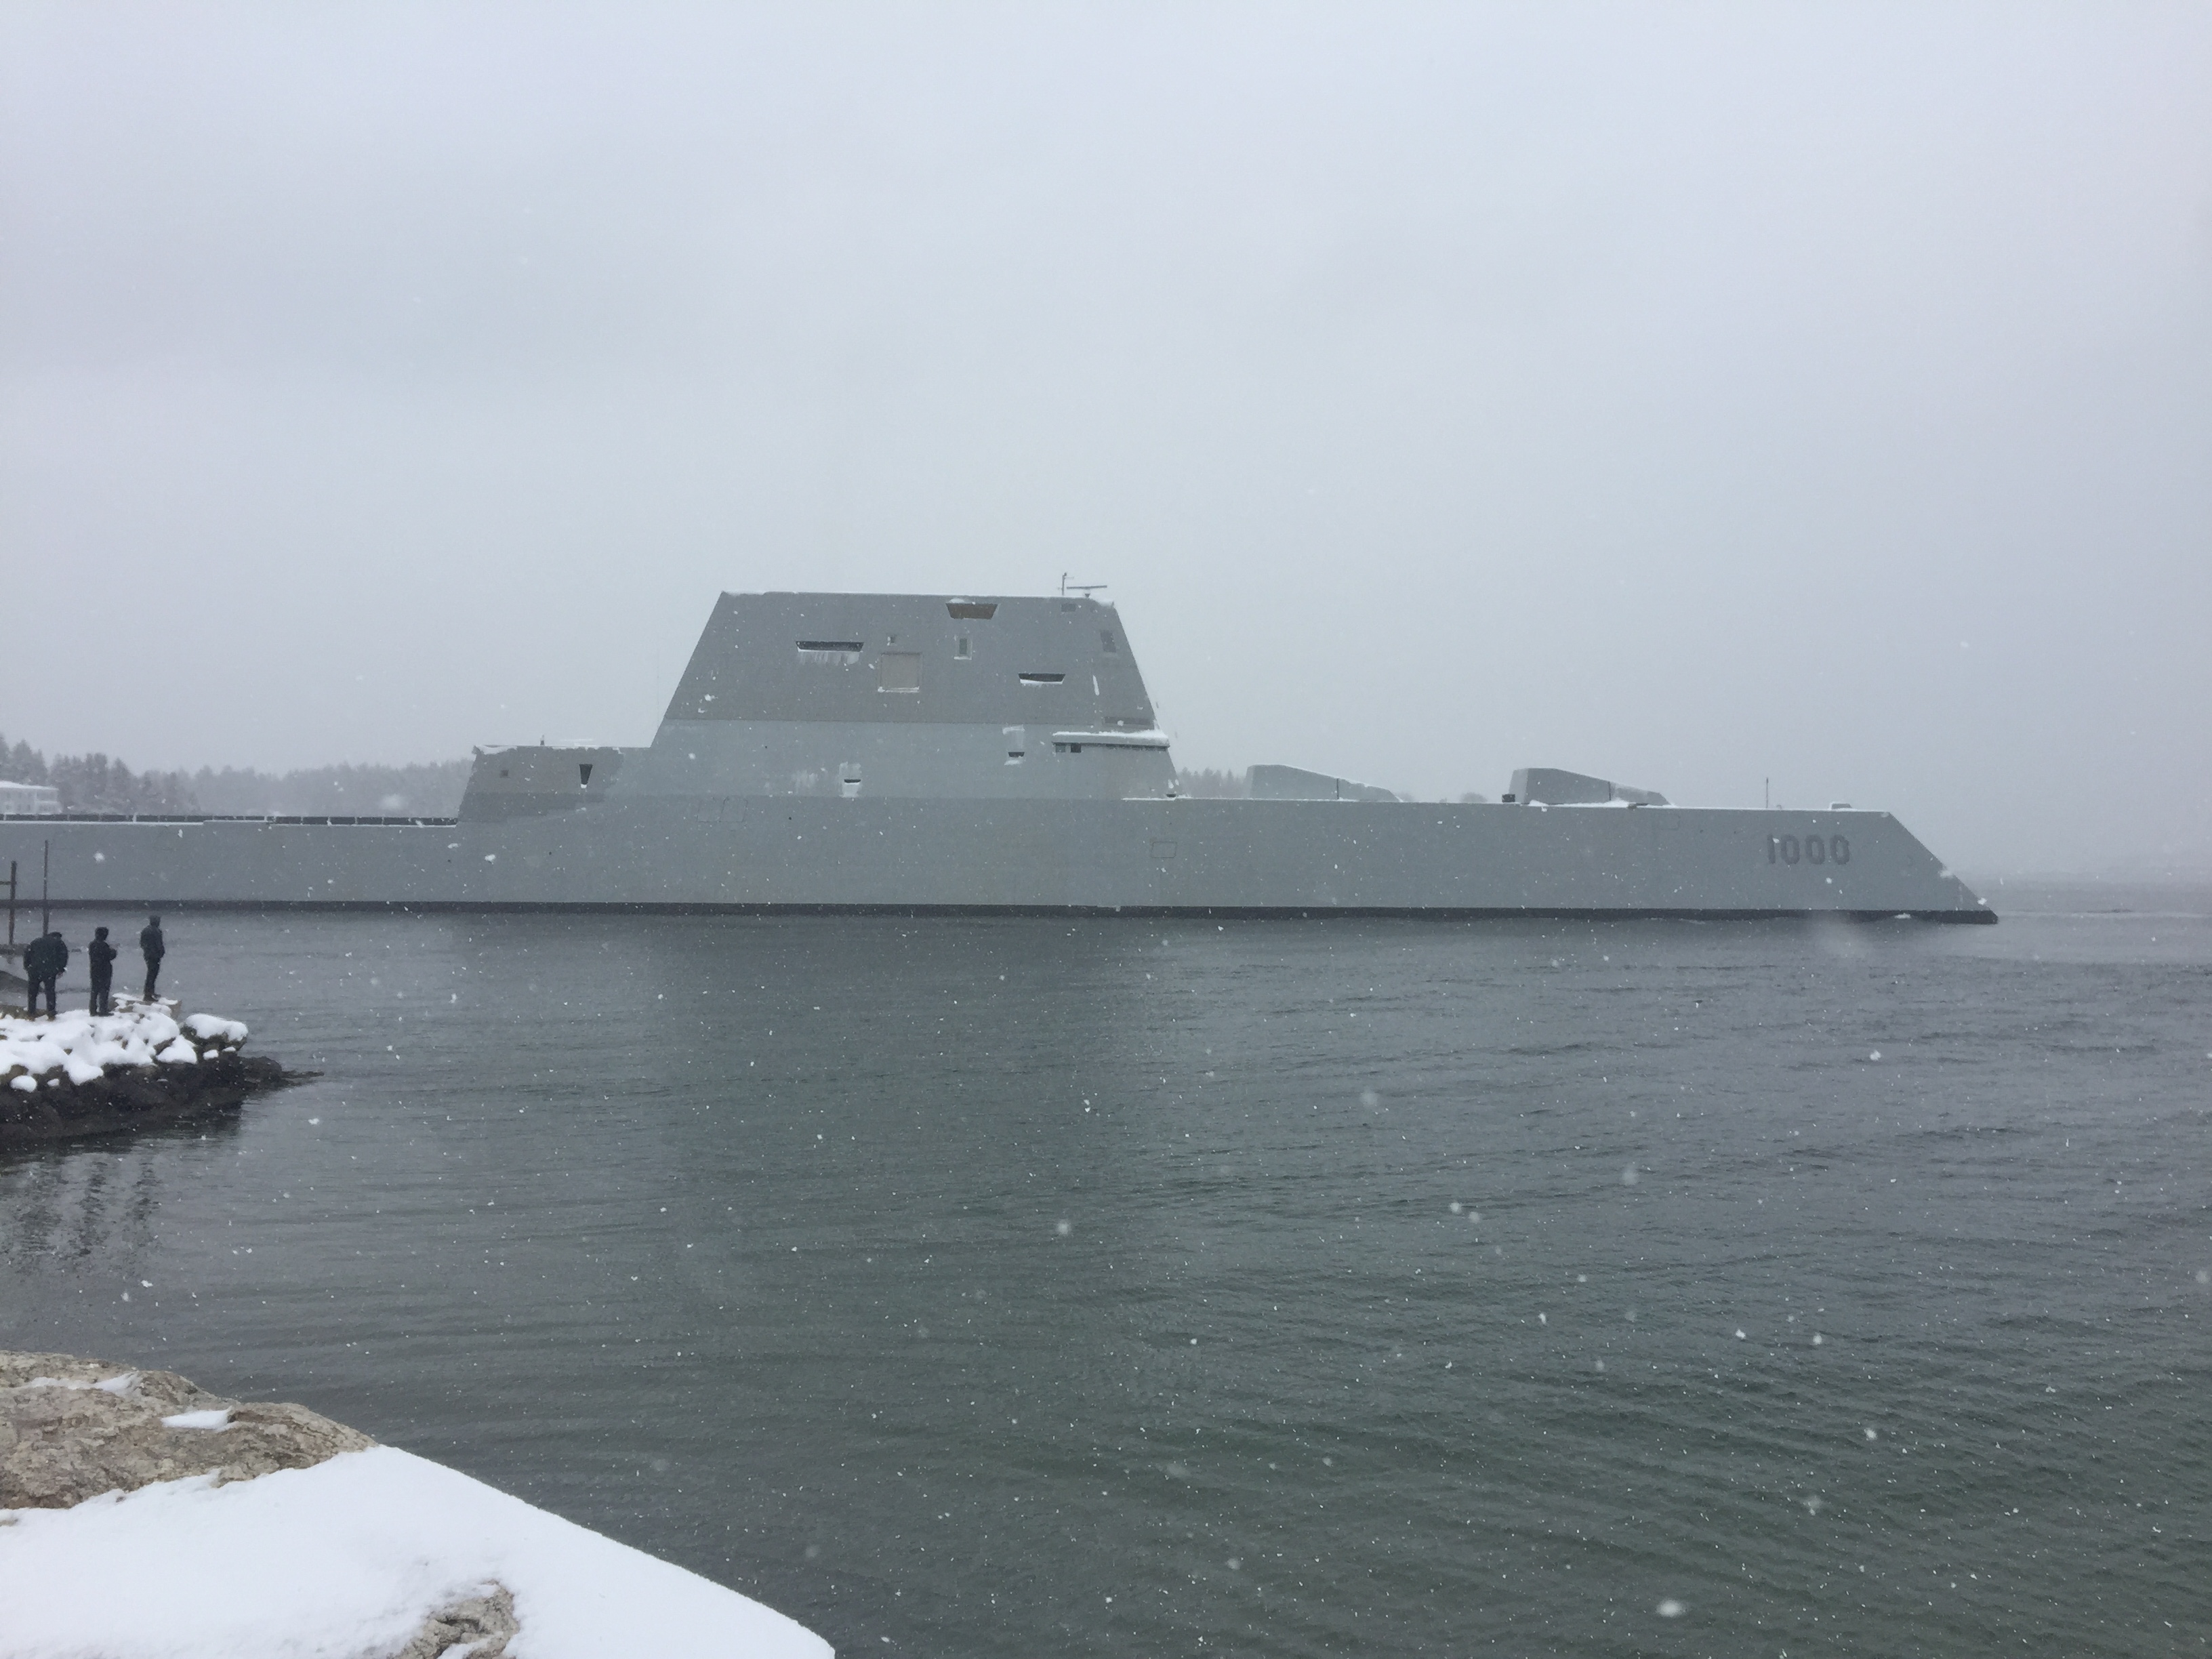 Zumwalt (DDG 1000) departs the Bath Iron Works shipyard for its second at-sea period to conduct builder's trials on March 21, 2016. US Navy Photo